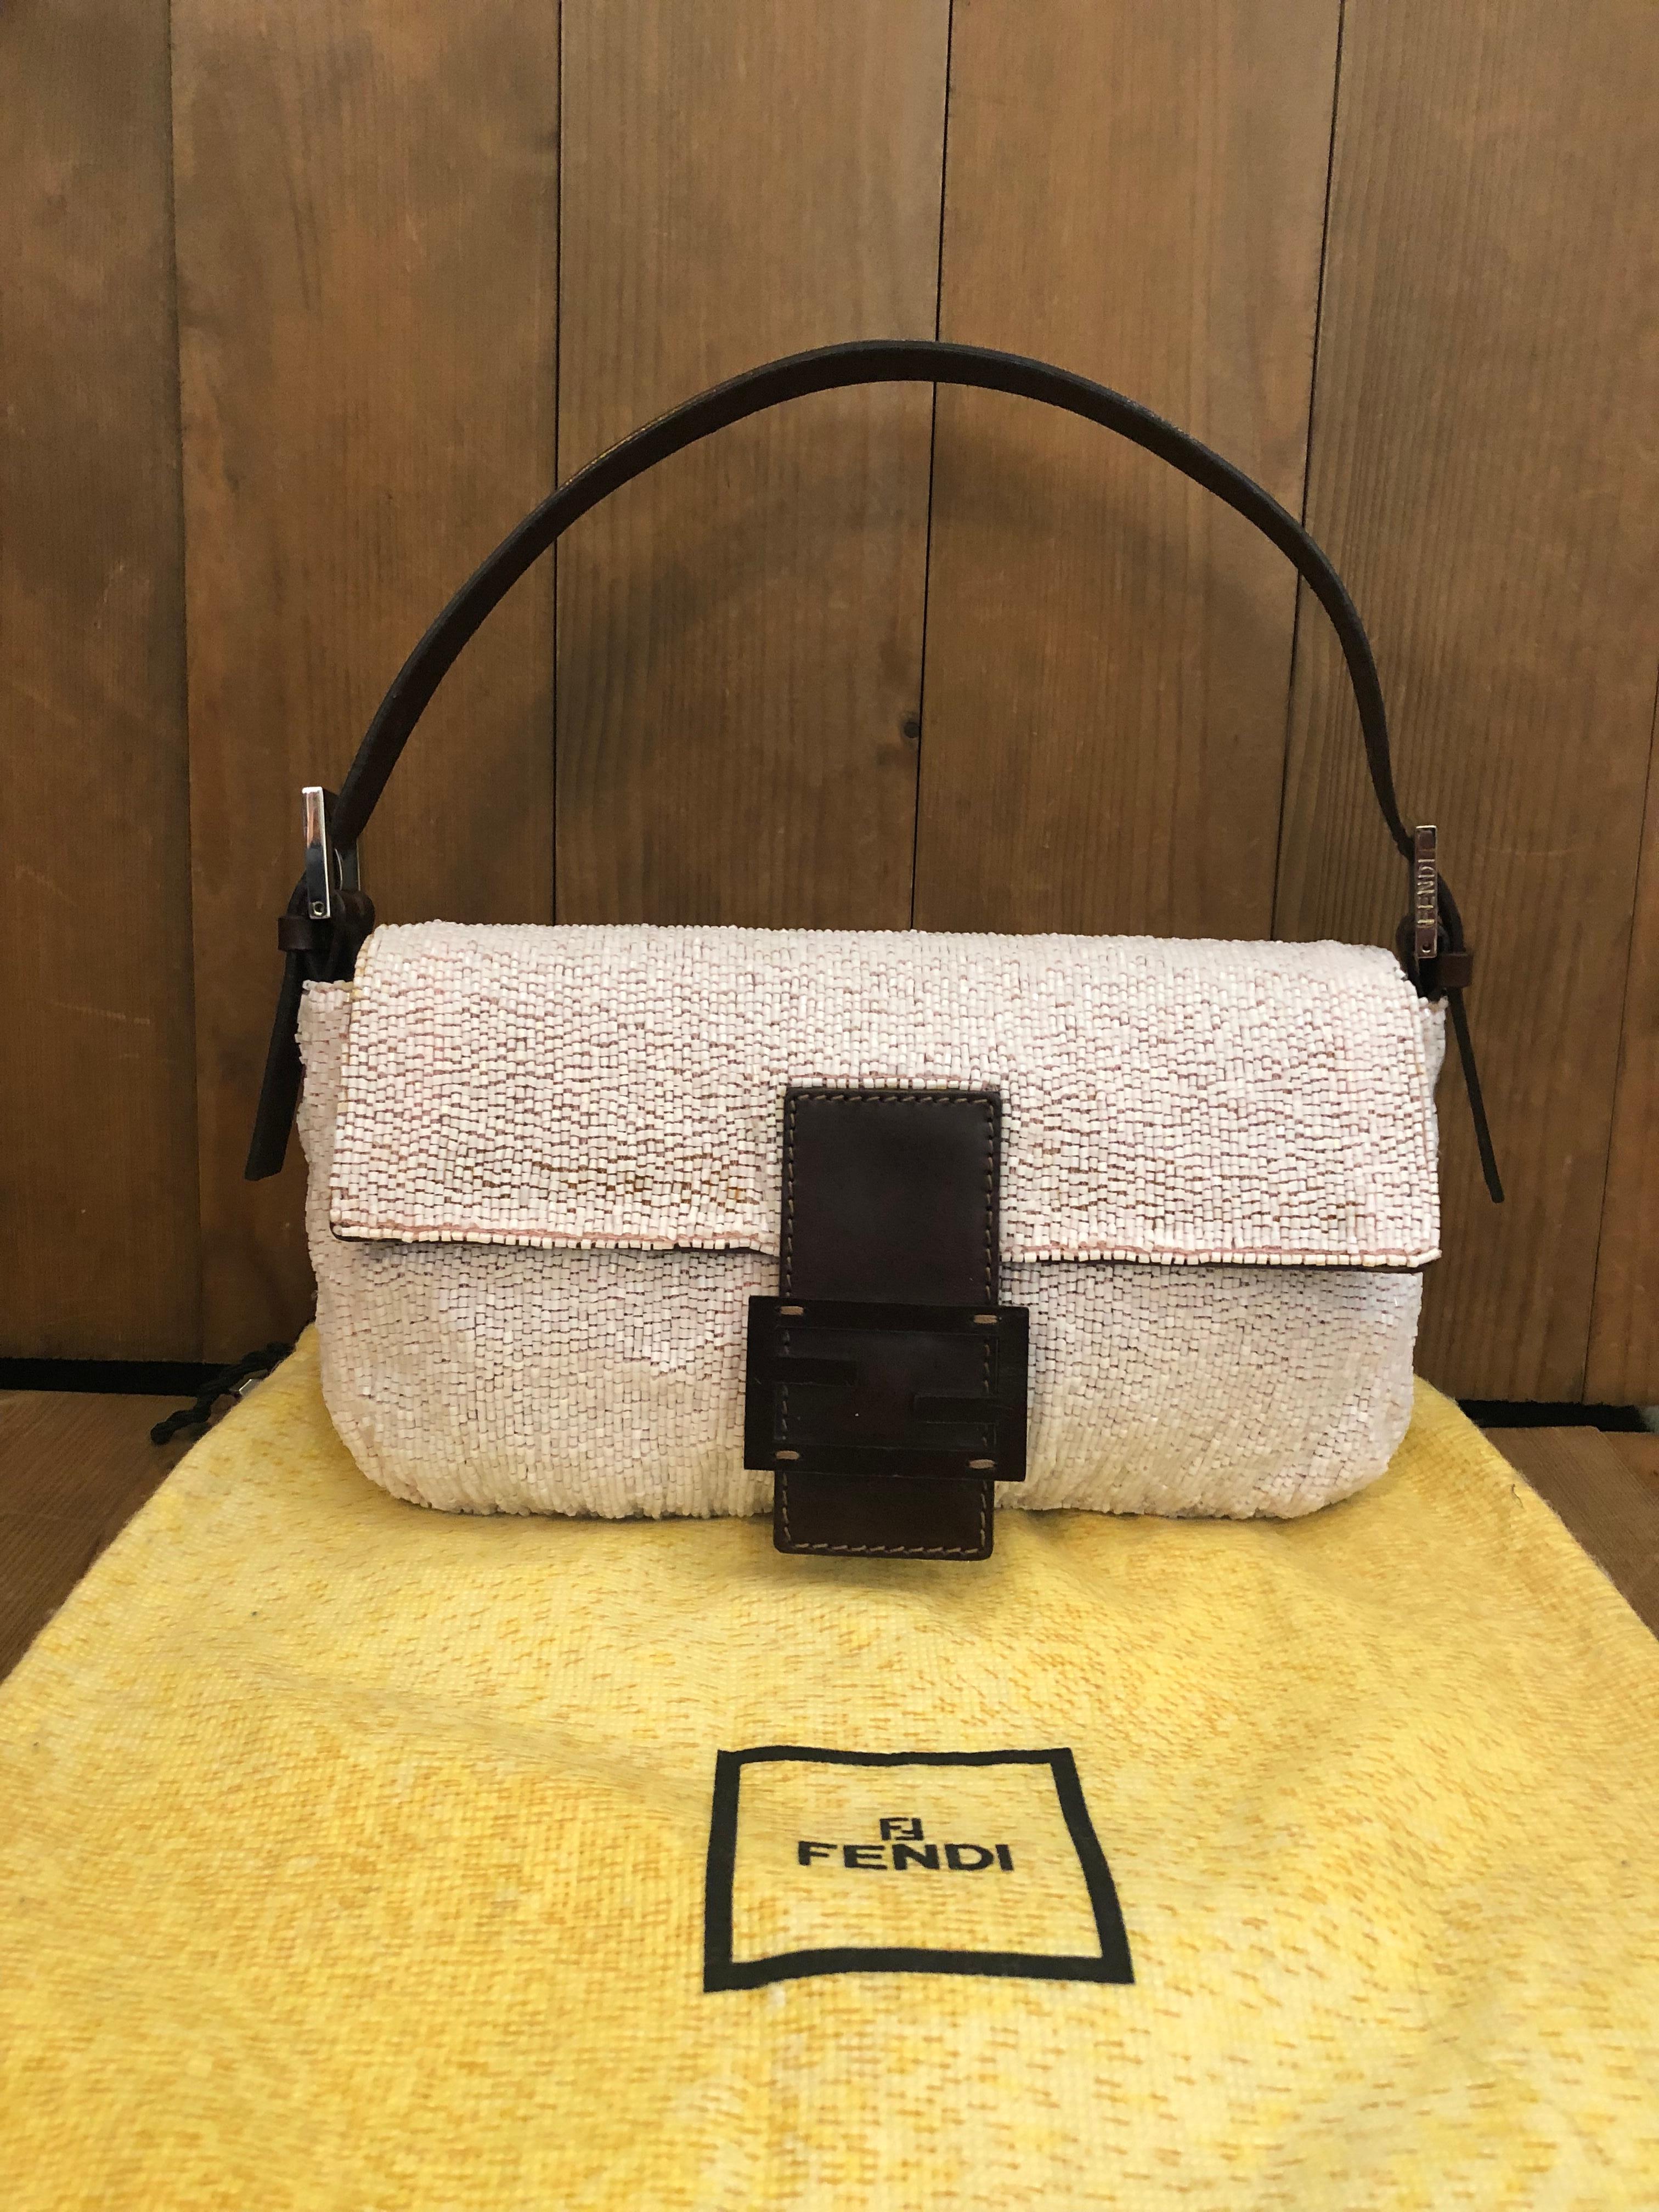 This iconic Fendi Baguette hand bag is crafted of and covered in pale pink beads with dark brown leather and satin interior featuring one interior zip pocket. Made in Italy. Magnetic snap fastening. Measures 10 x 5.5 x 2 inches Drop 6. Comes with